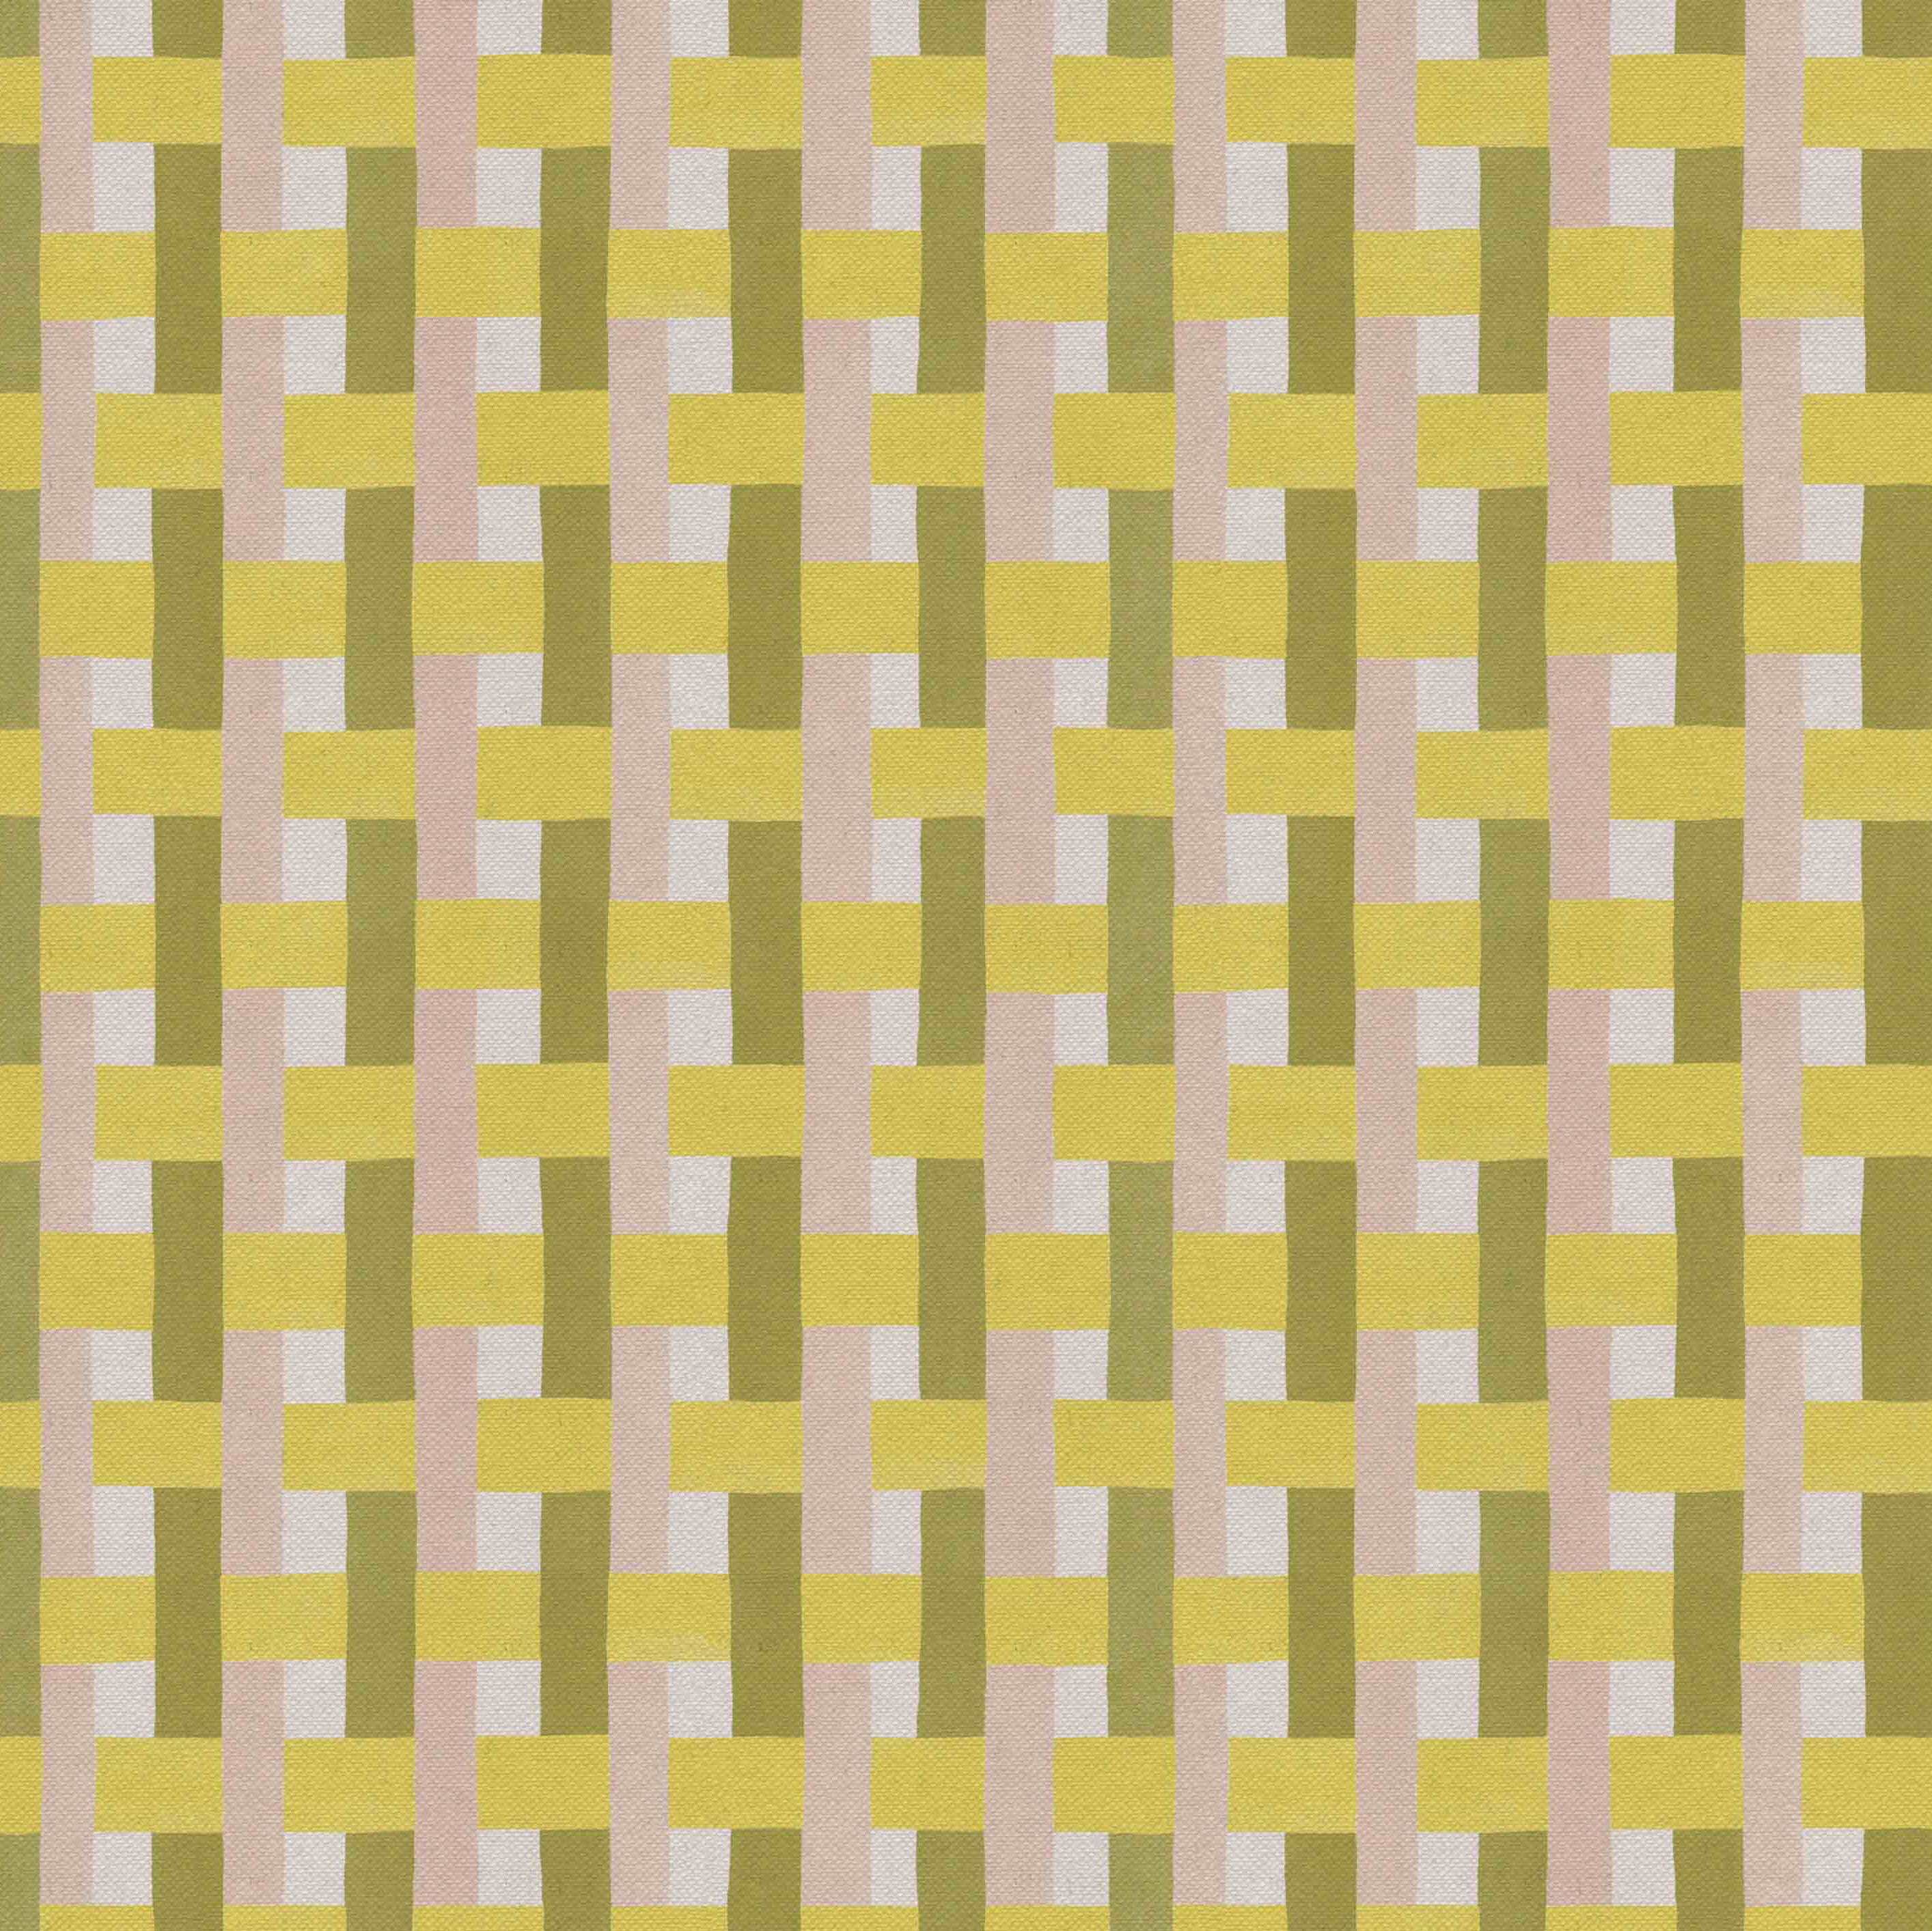 Detail of fabric in an interlocking checked pattern in shades of pink, yellow and sage.